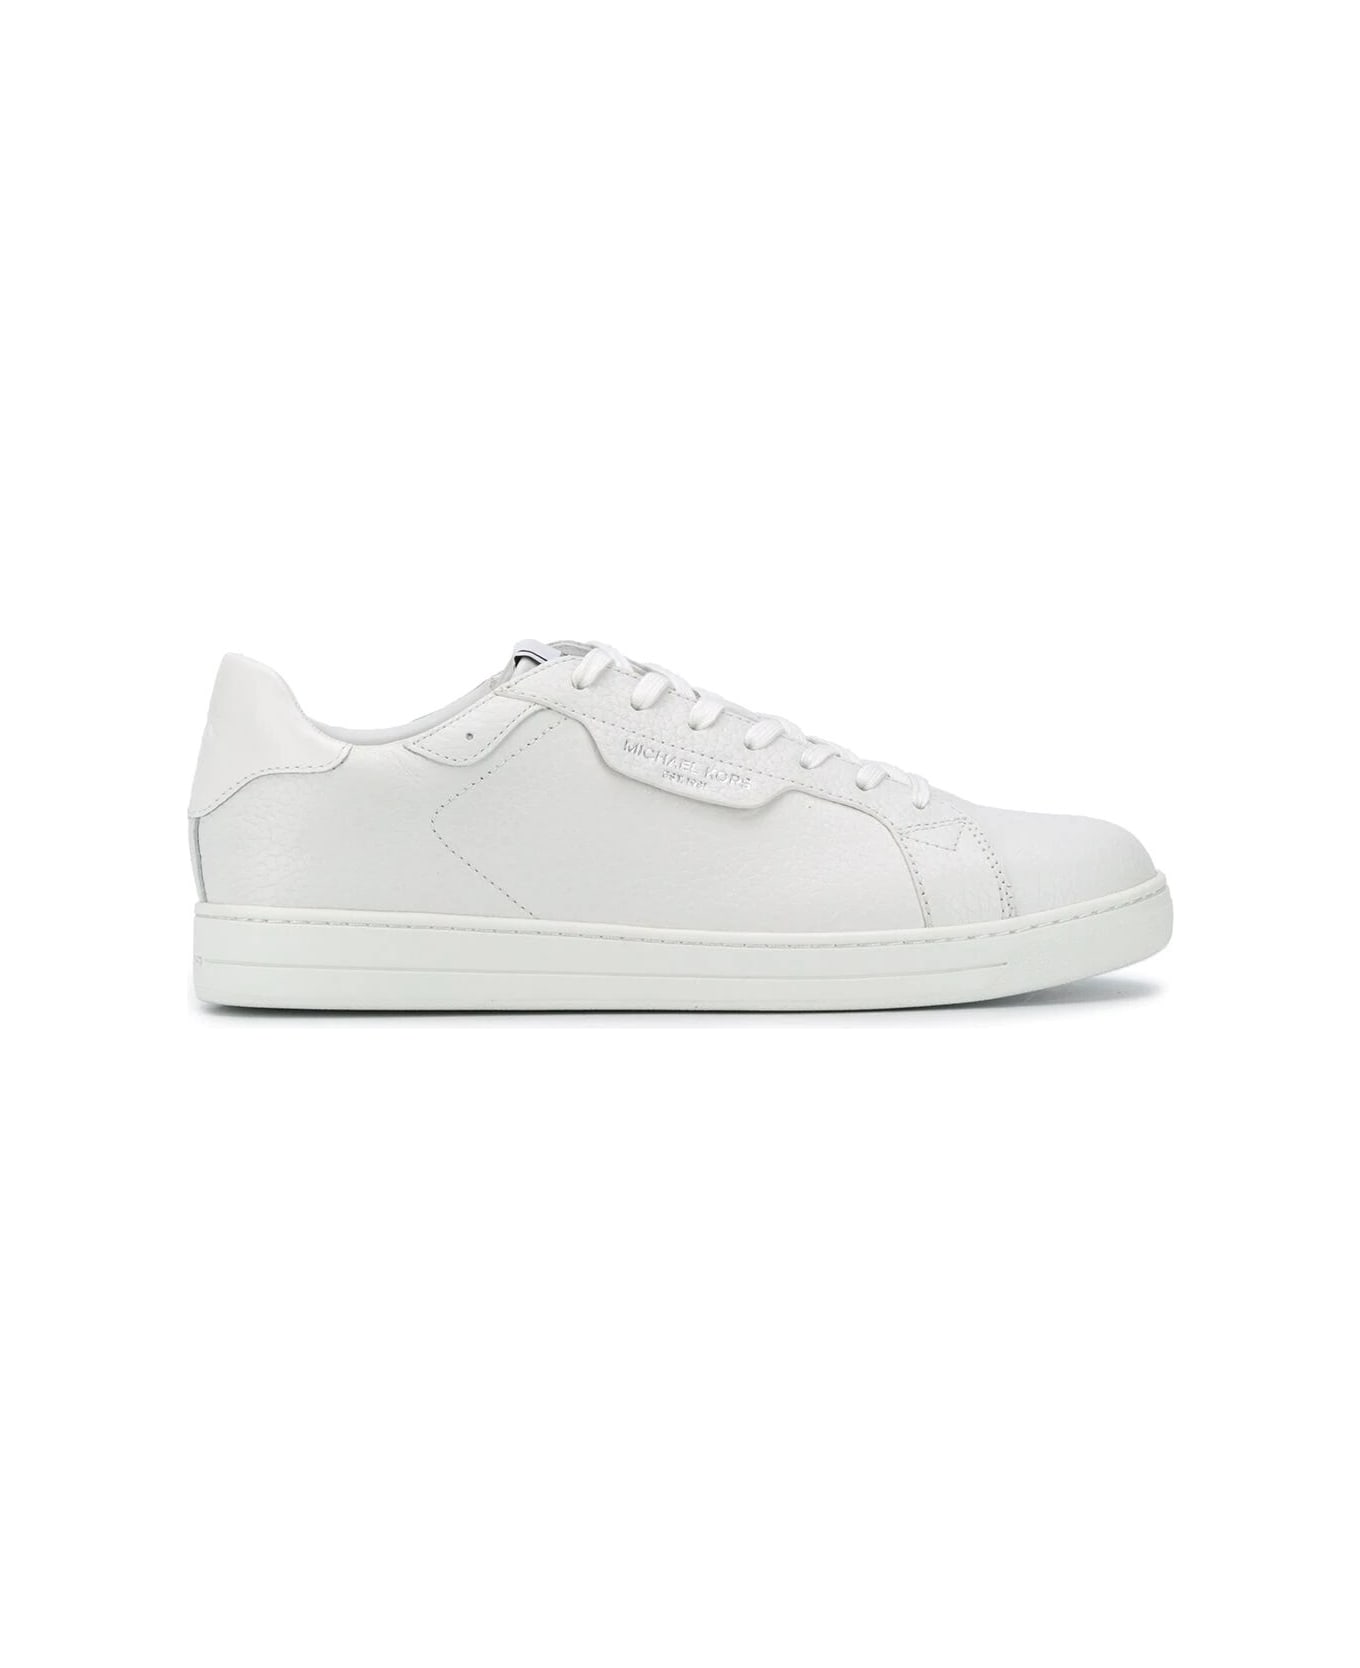 Michael Kors Keating Lace-up Sneakers - Optical White スニーカー